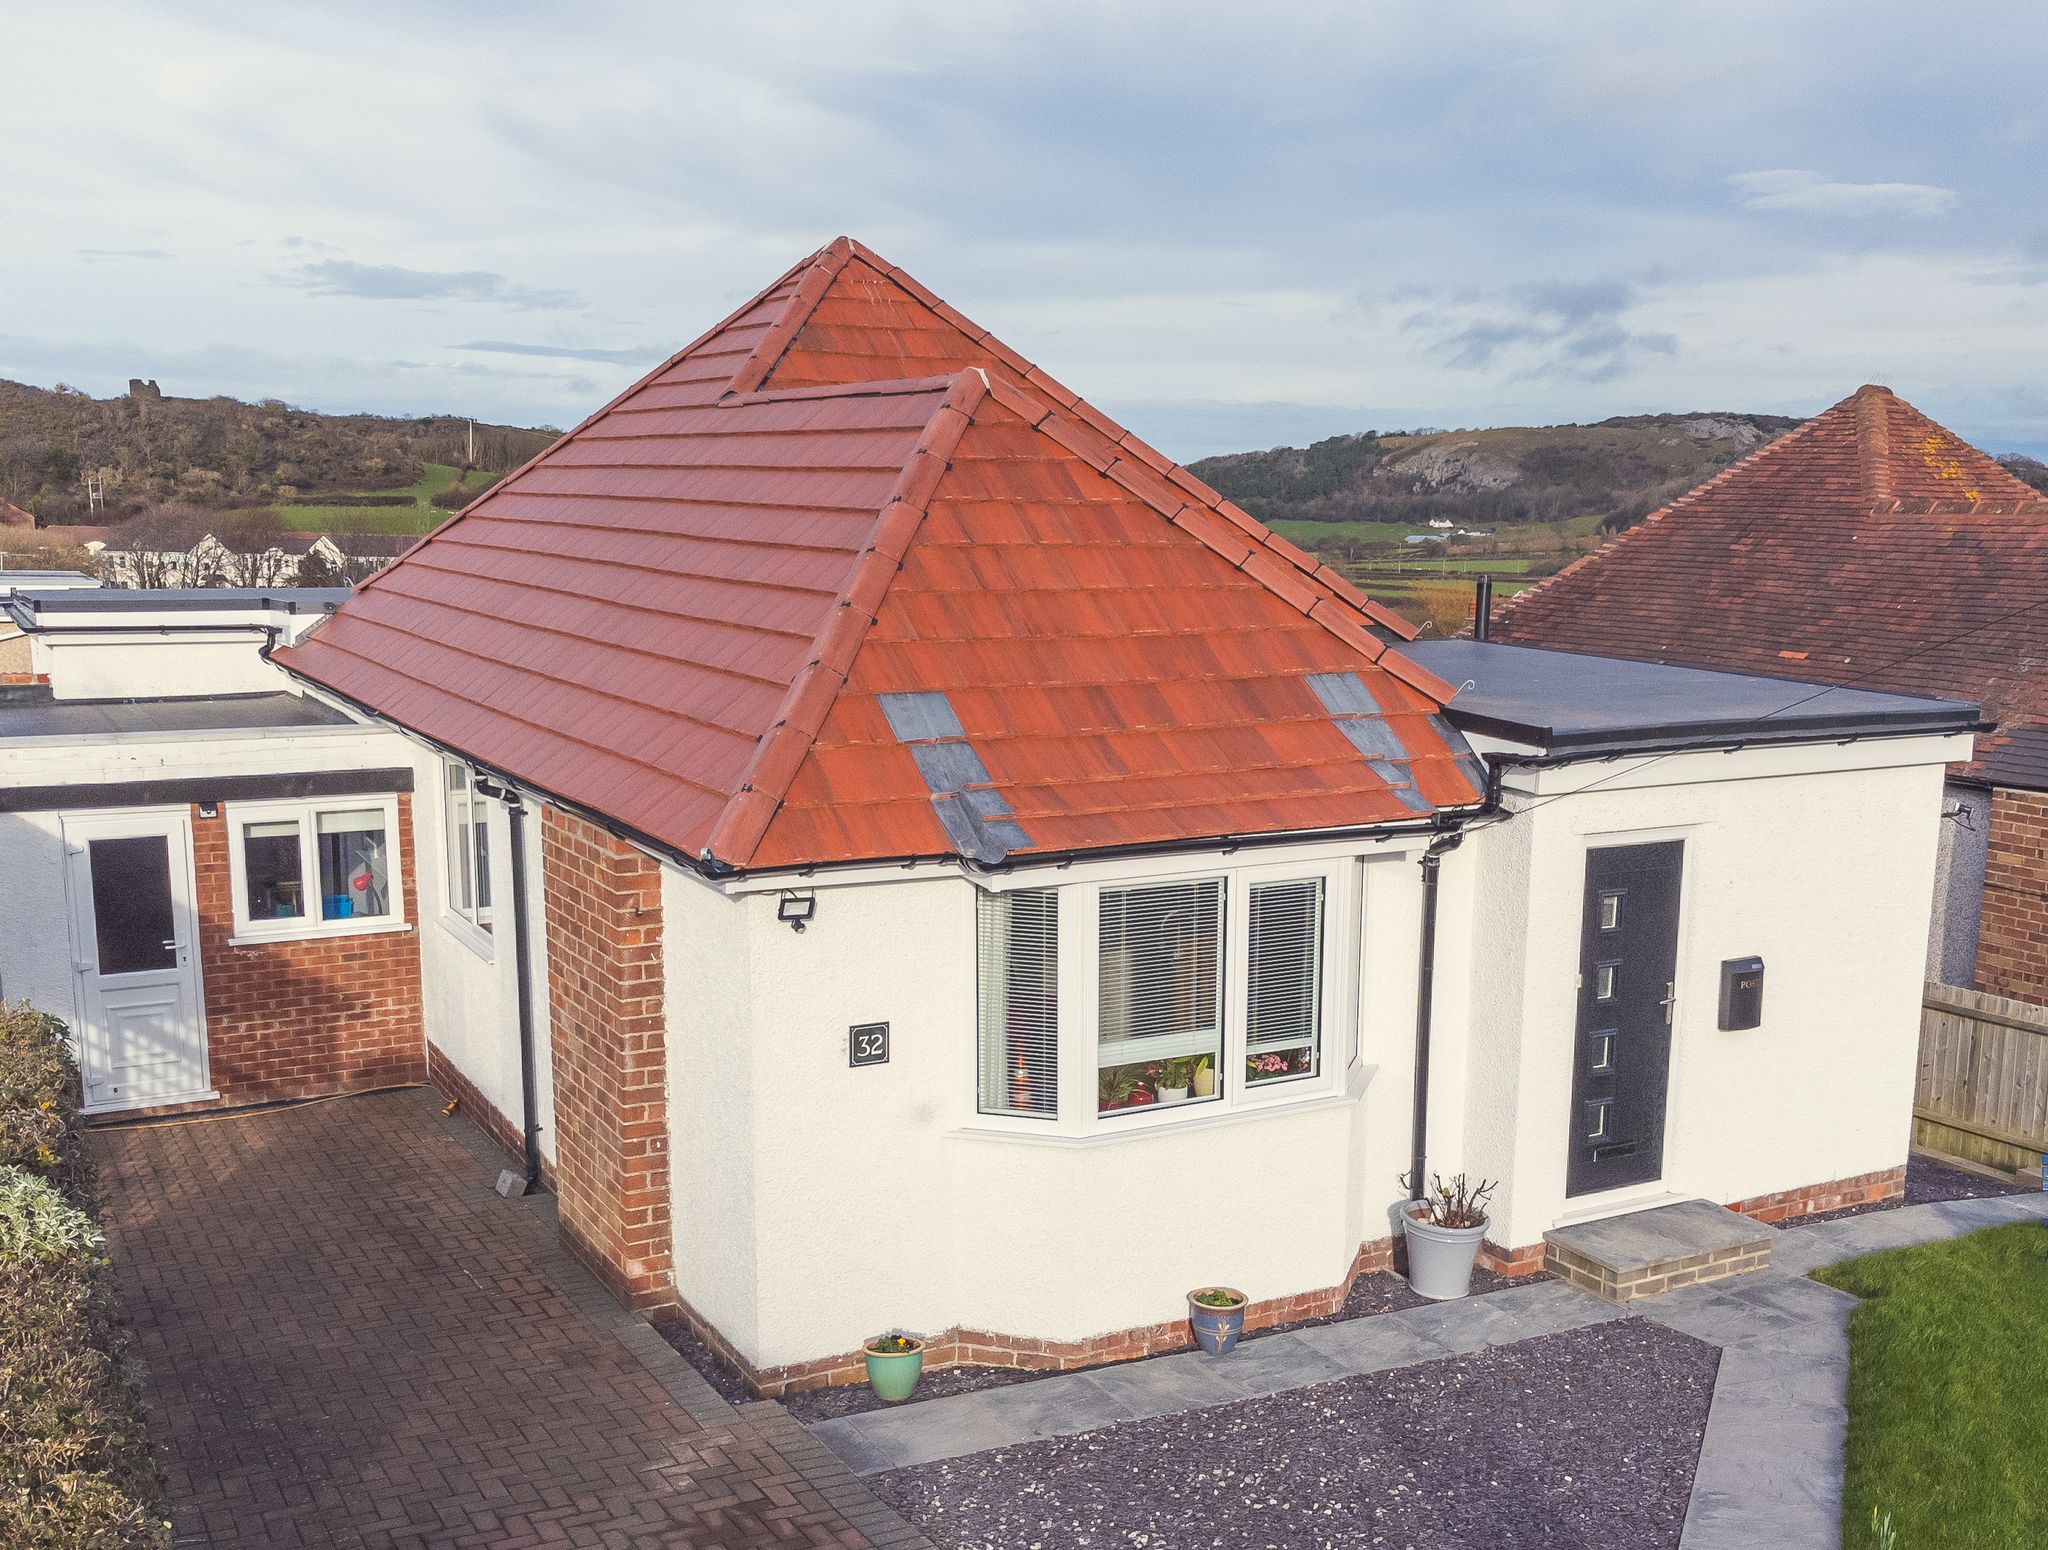 Tile Roof Contractors Chwilog, LL53 - DD Roofing